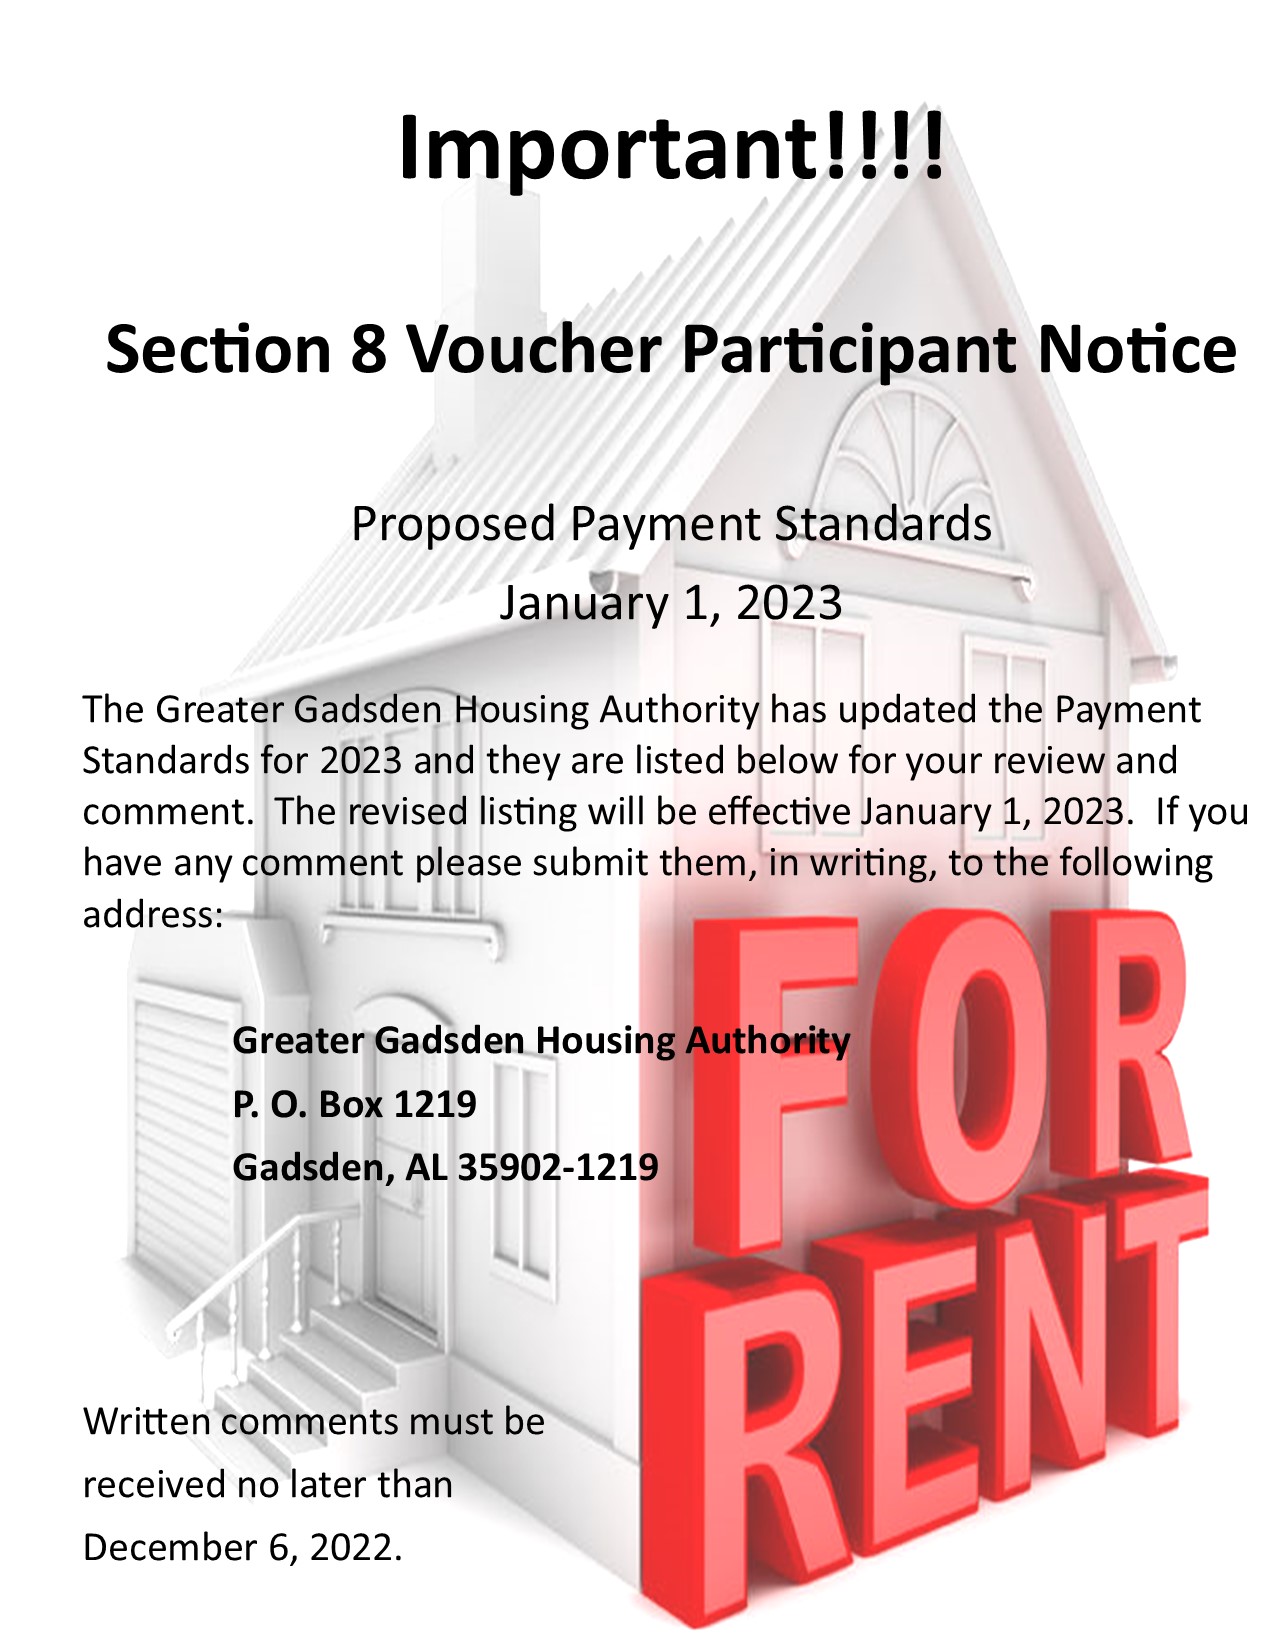 HCV/Section 8 Proposed Payment Standards Greater Gadsden Housing